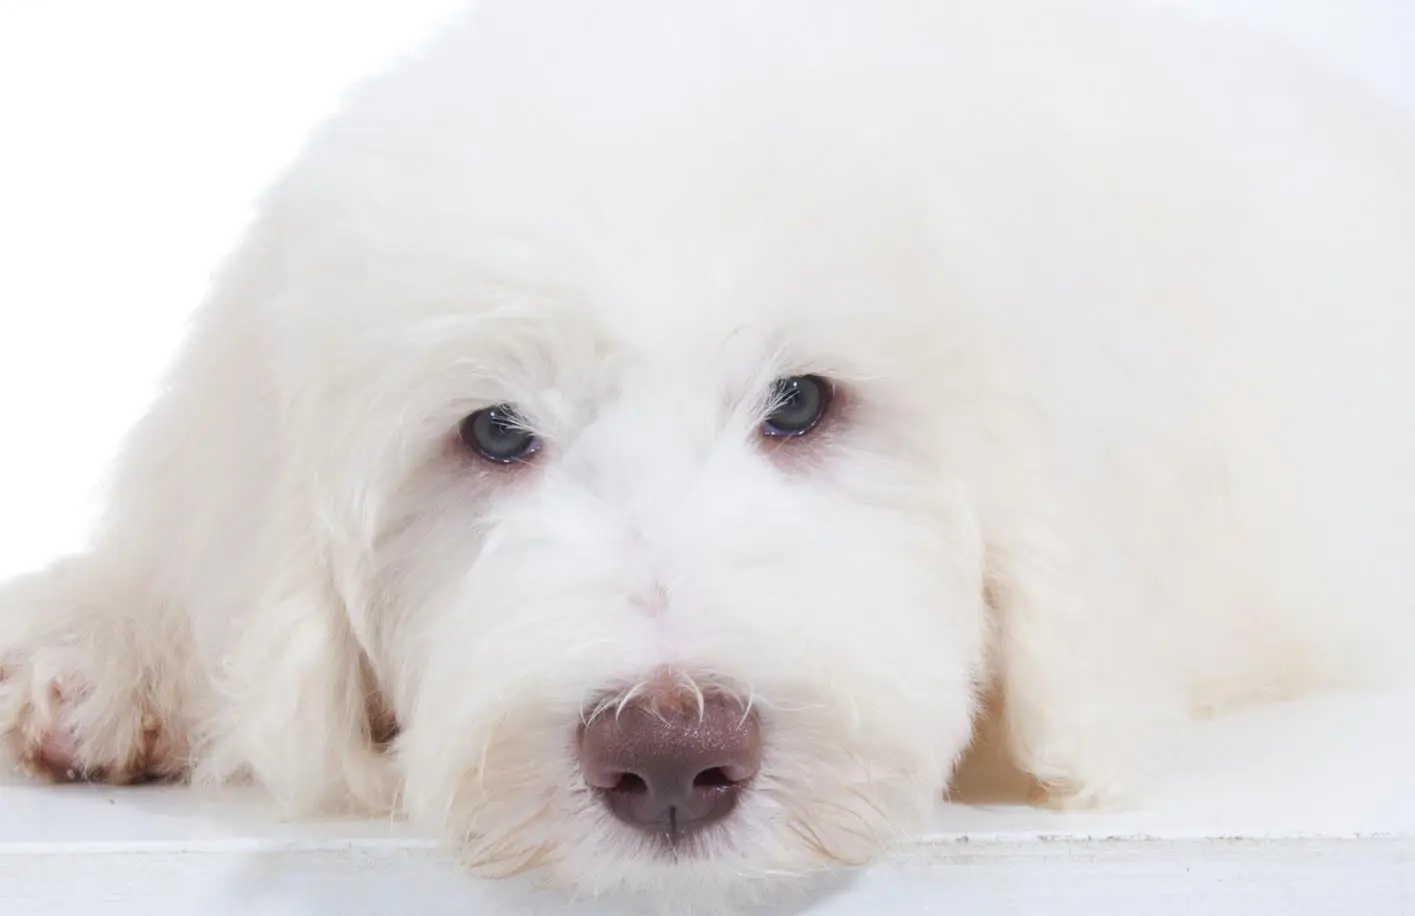 ultra cream F2B English teddy bear goldendoodle with a chocolate nose posing for a close up photo